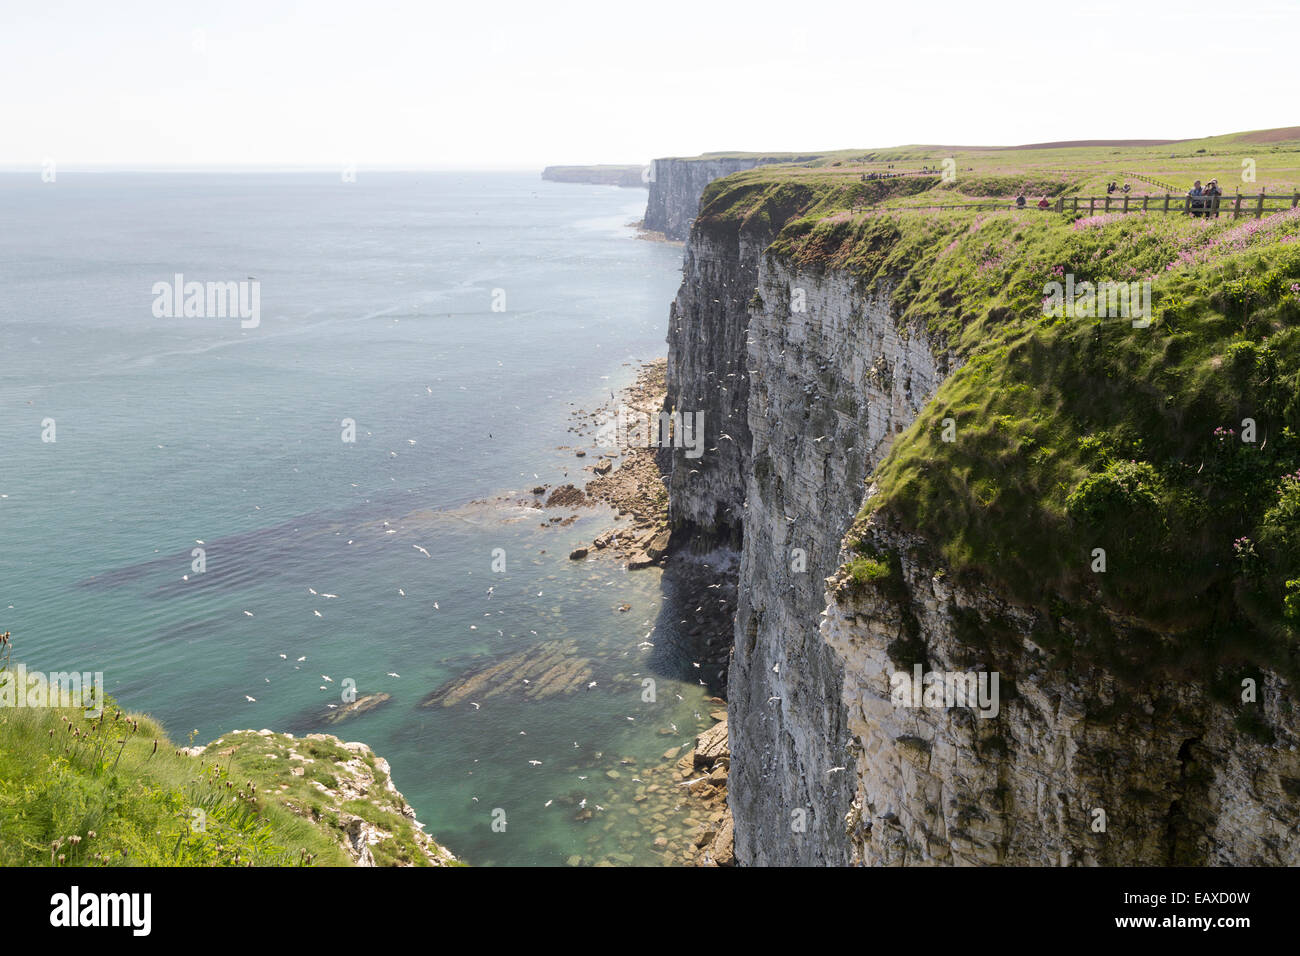 UK, Yorkshire, Bempton Cliffs, view along the cliffs in the direction of Flamborough from Bempton. Stock Photo